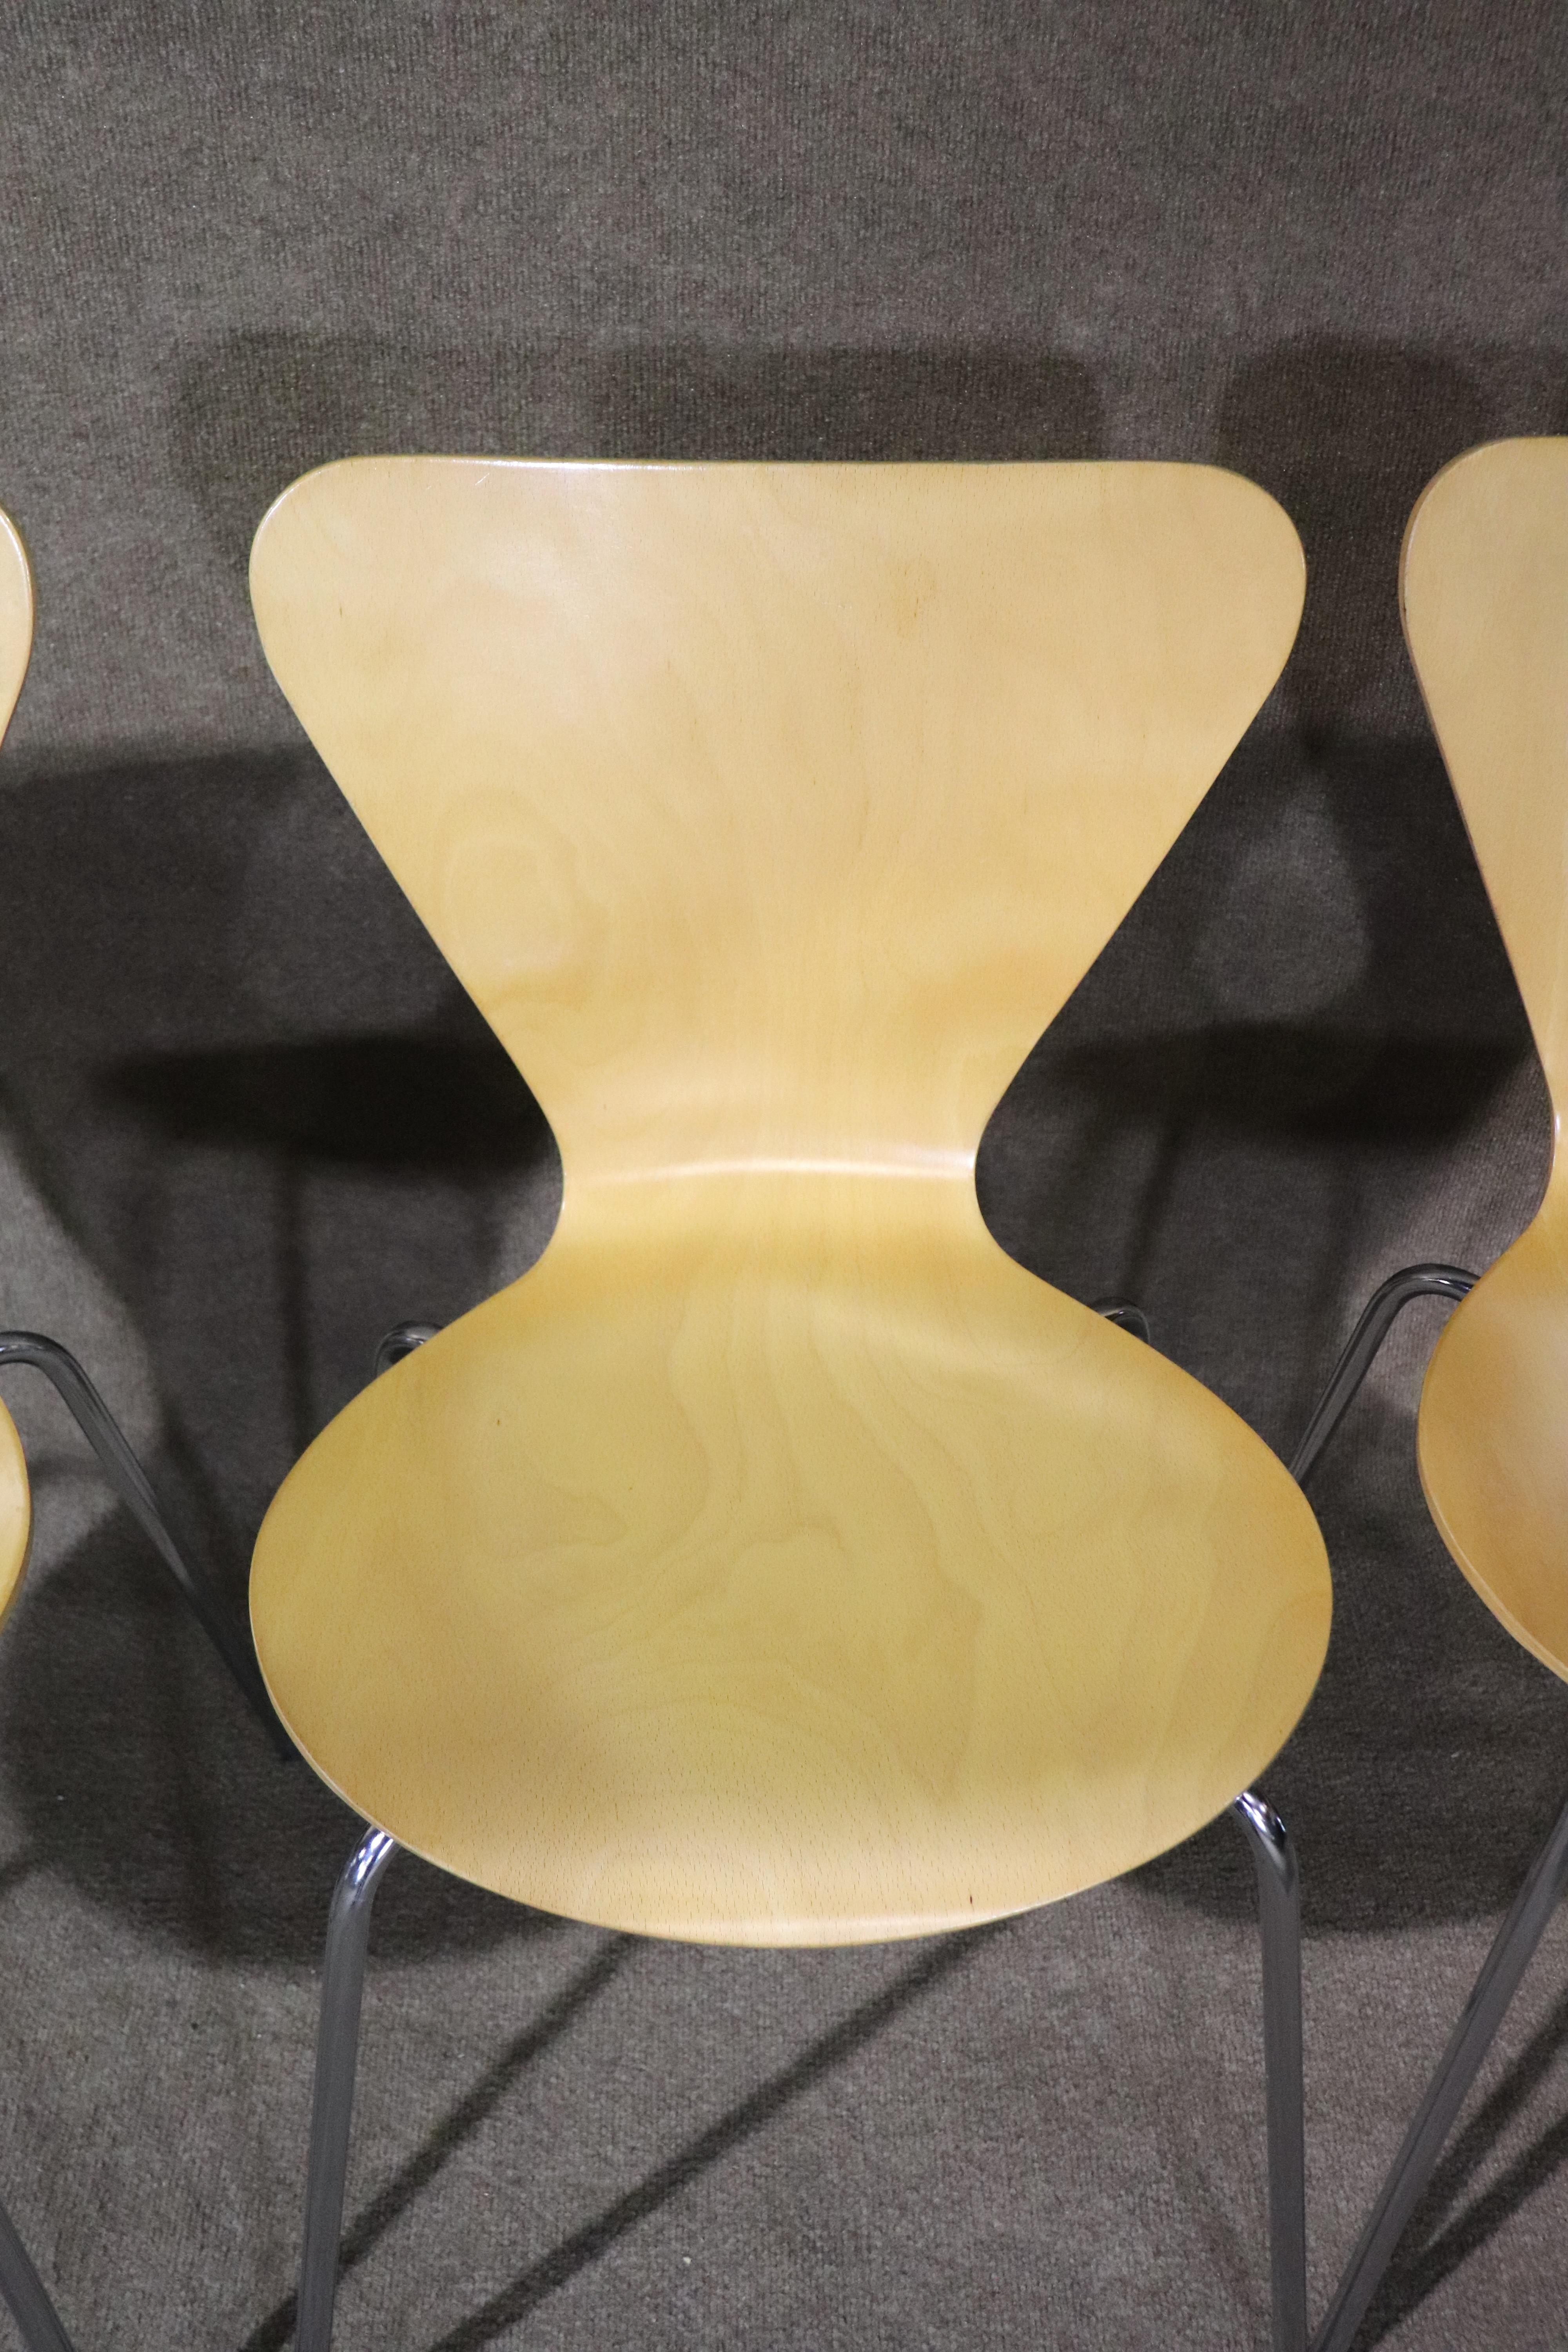 Arne Jacobsen for Fritz Hansen Dining Chairs In Good Condition For Sale In Brooklyn, NY